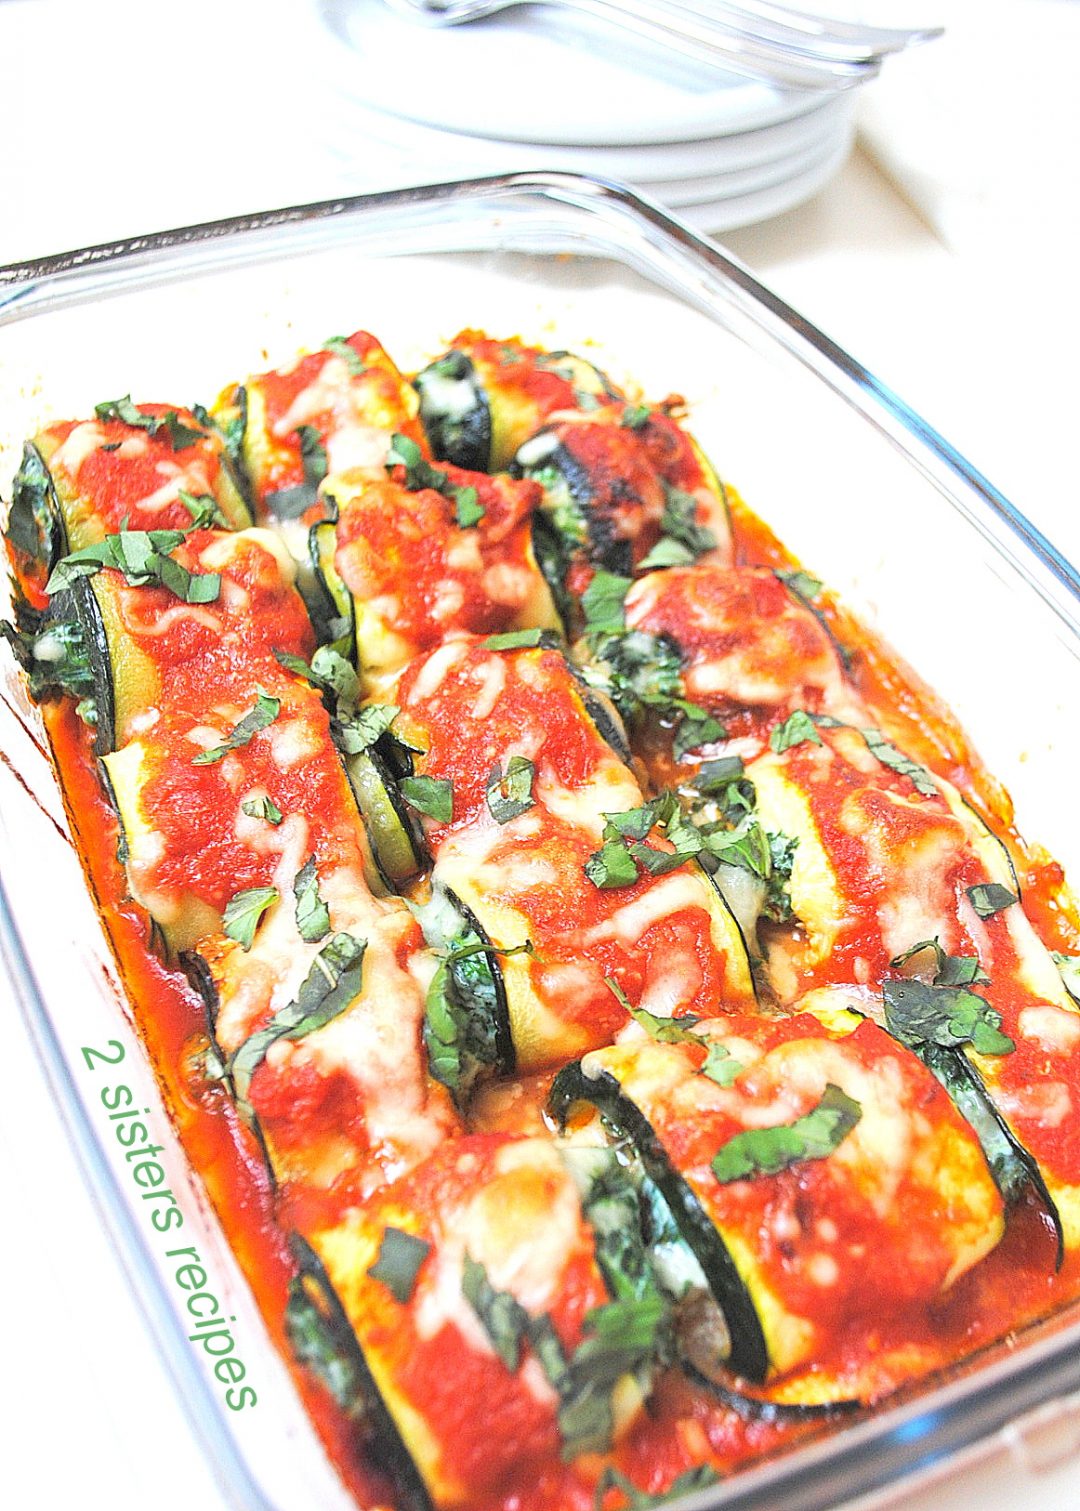 Zucchini Rollatini with Spinach and Cheese by 2sistersrecipes.com